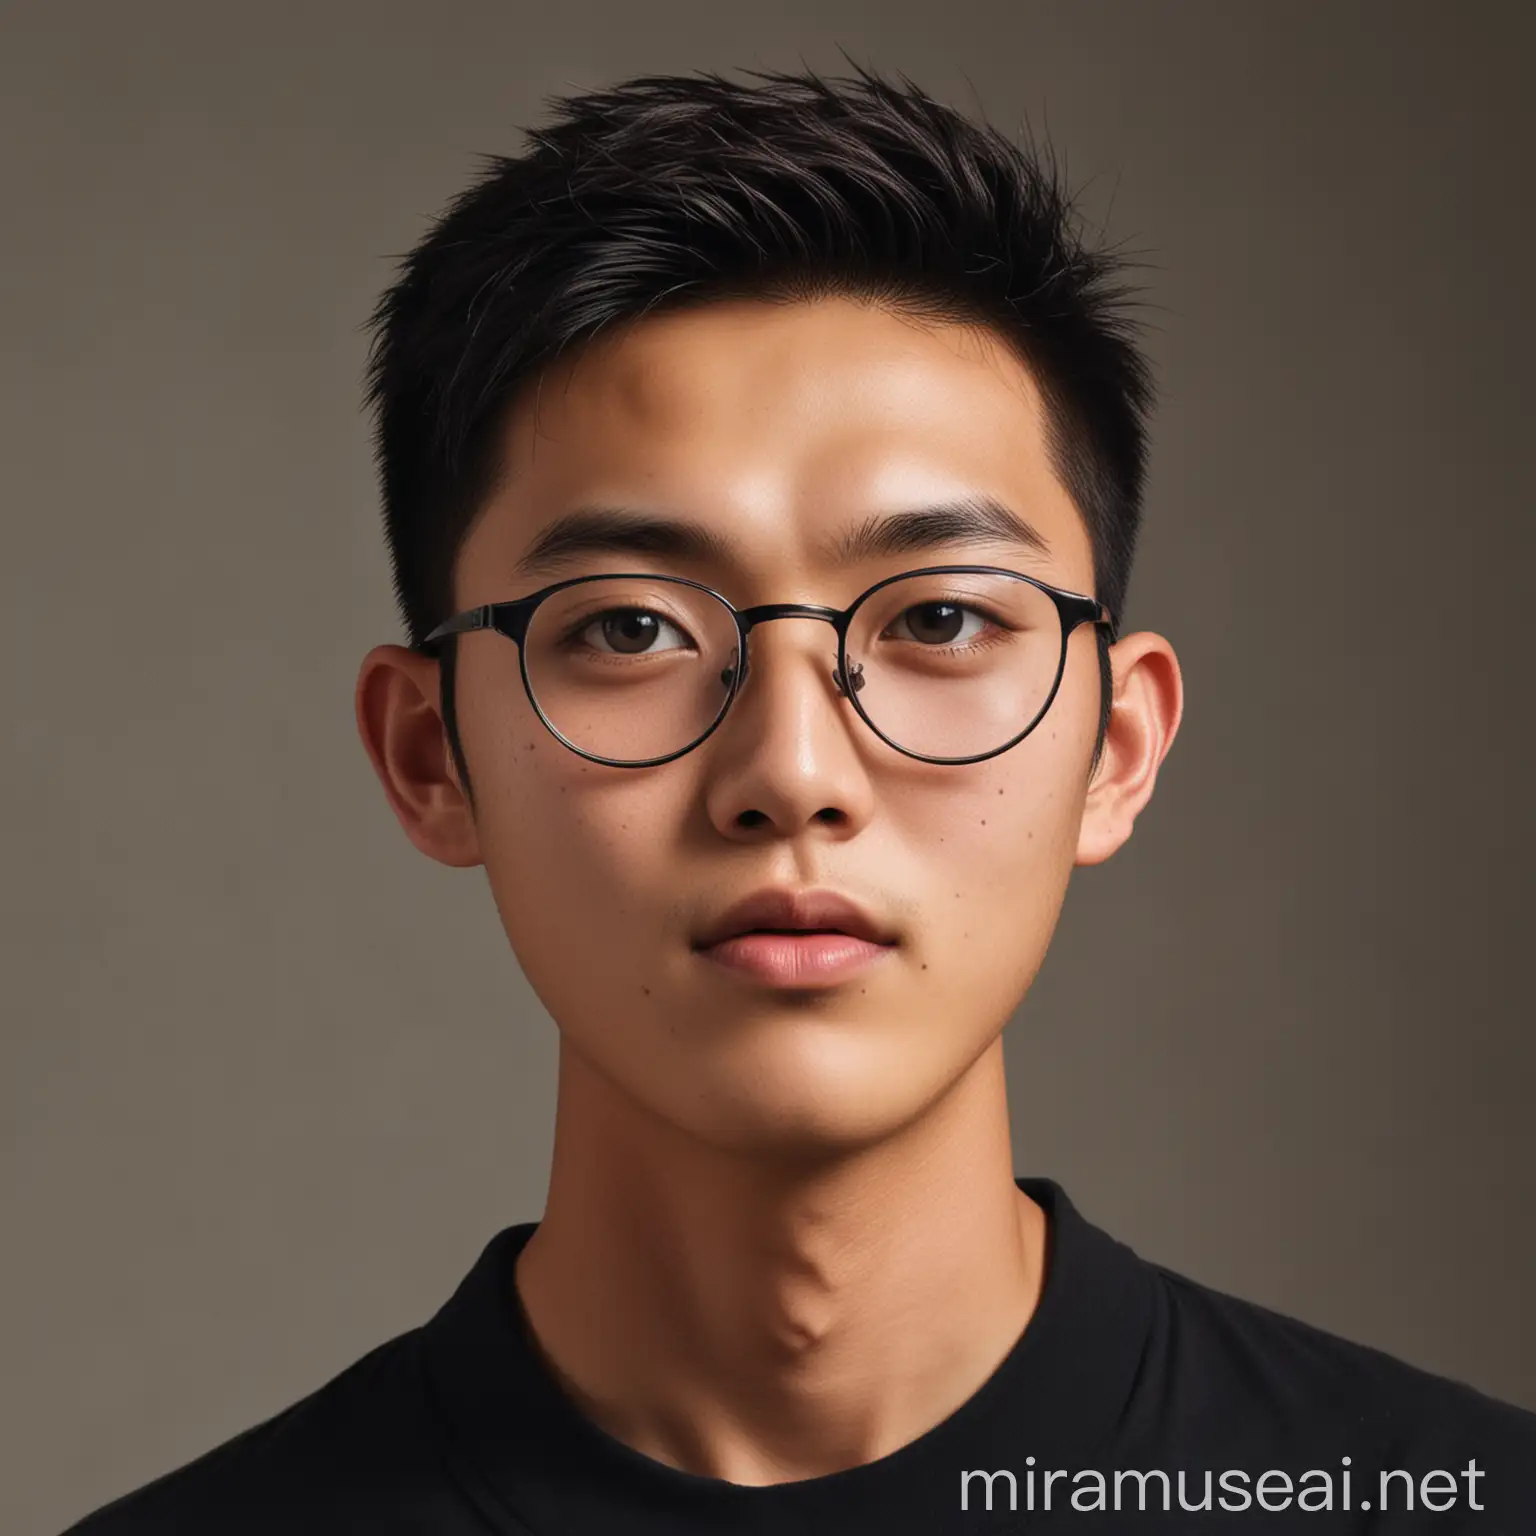 Stylish 20YearOld Chinese Male with Crew Cut and BlackFramed Glasses